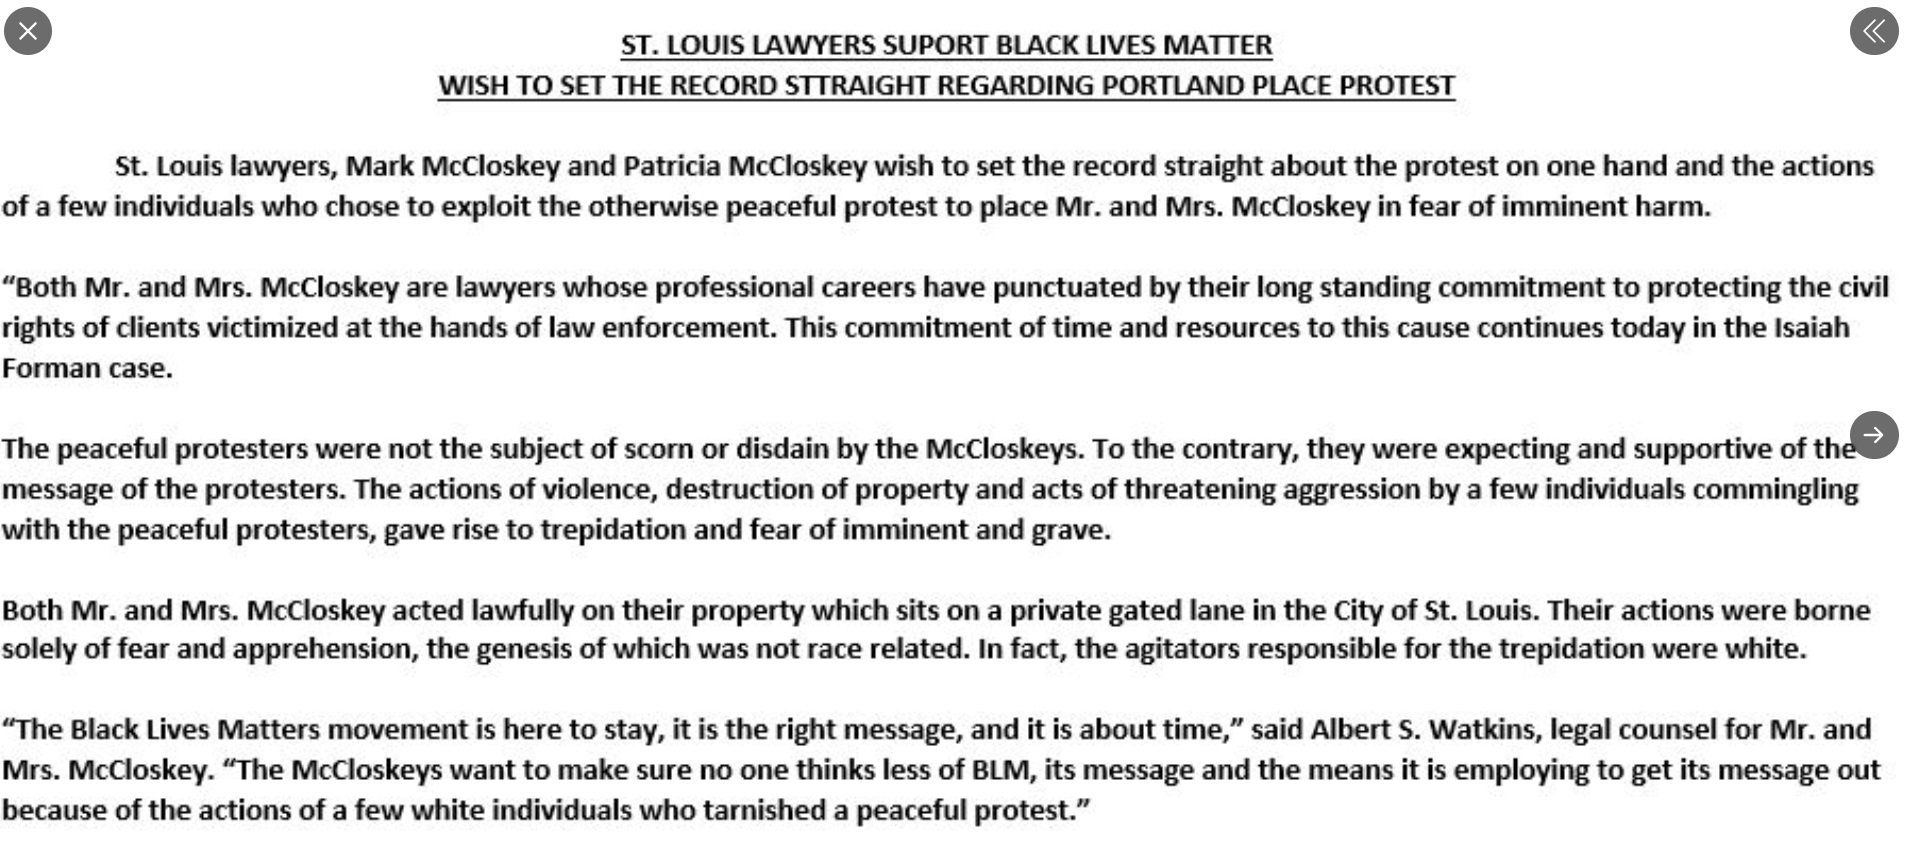 PHOTO Patricia McCloskey Says She Supports Black Lives Matter And That The Peope Who They Feared Were White